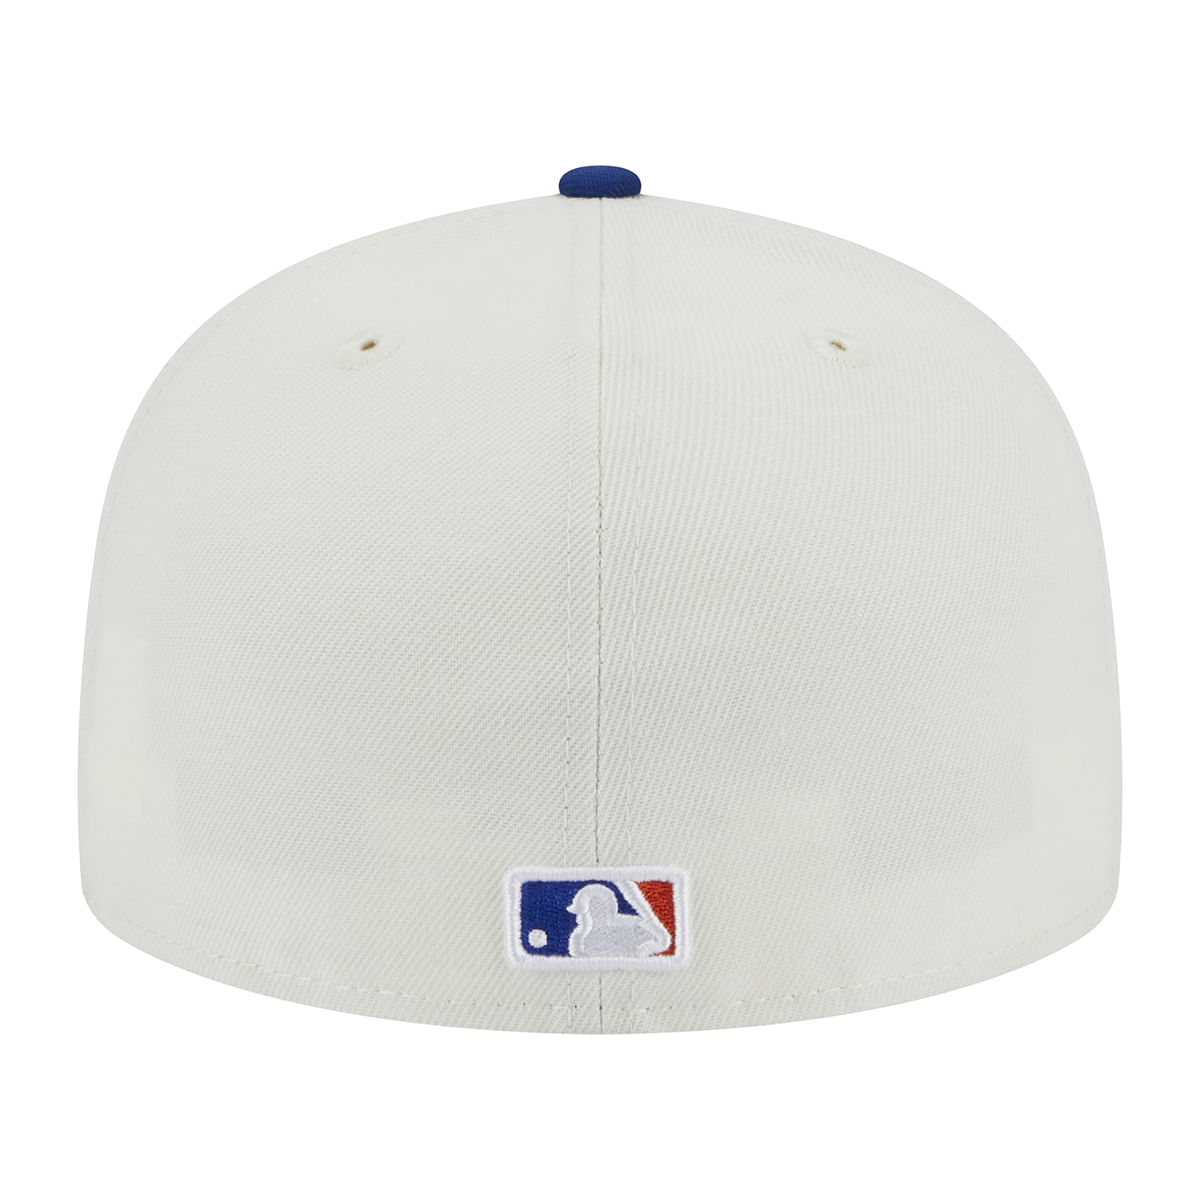 New Era MLB New York Mets Authentic Collection EMEA 59Fifty Fitted Cap Blue